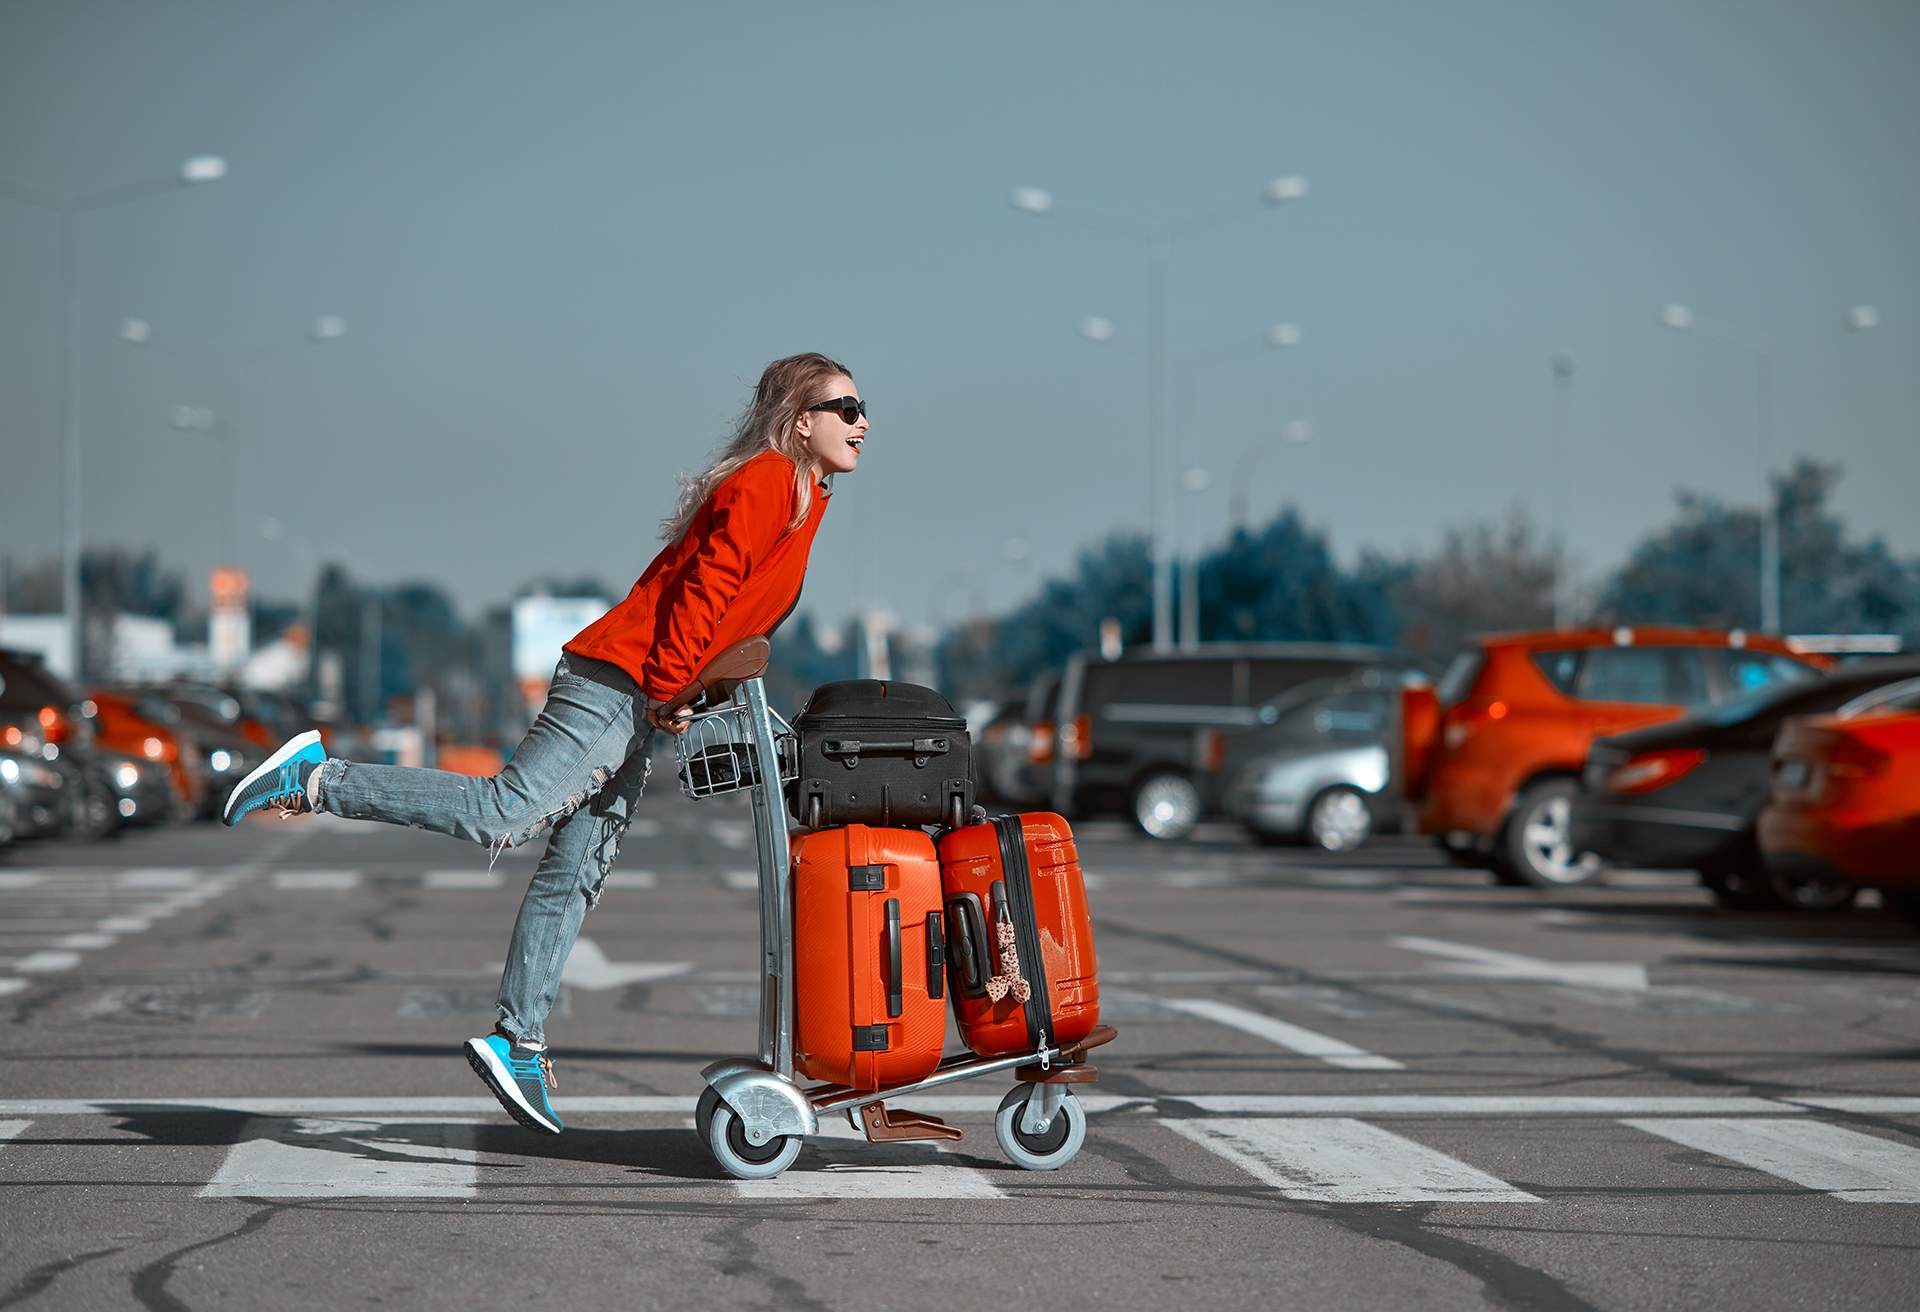 theme_person_travel_luggage_parking-lot_airport-gettyimages-641552182_universal_within-usage-period_62923